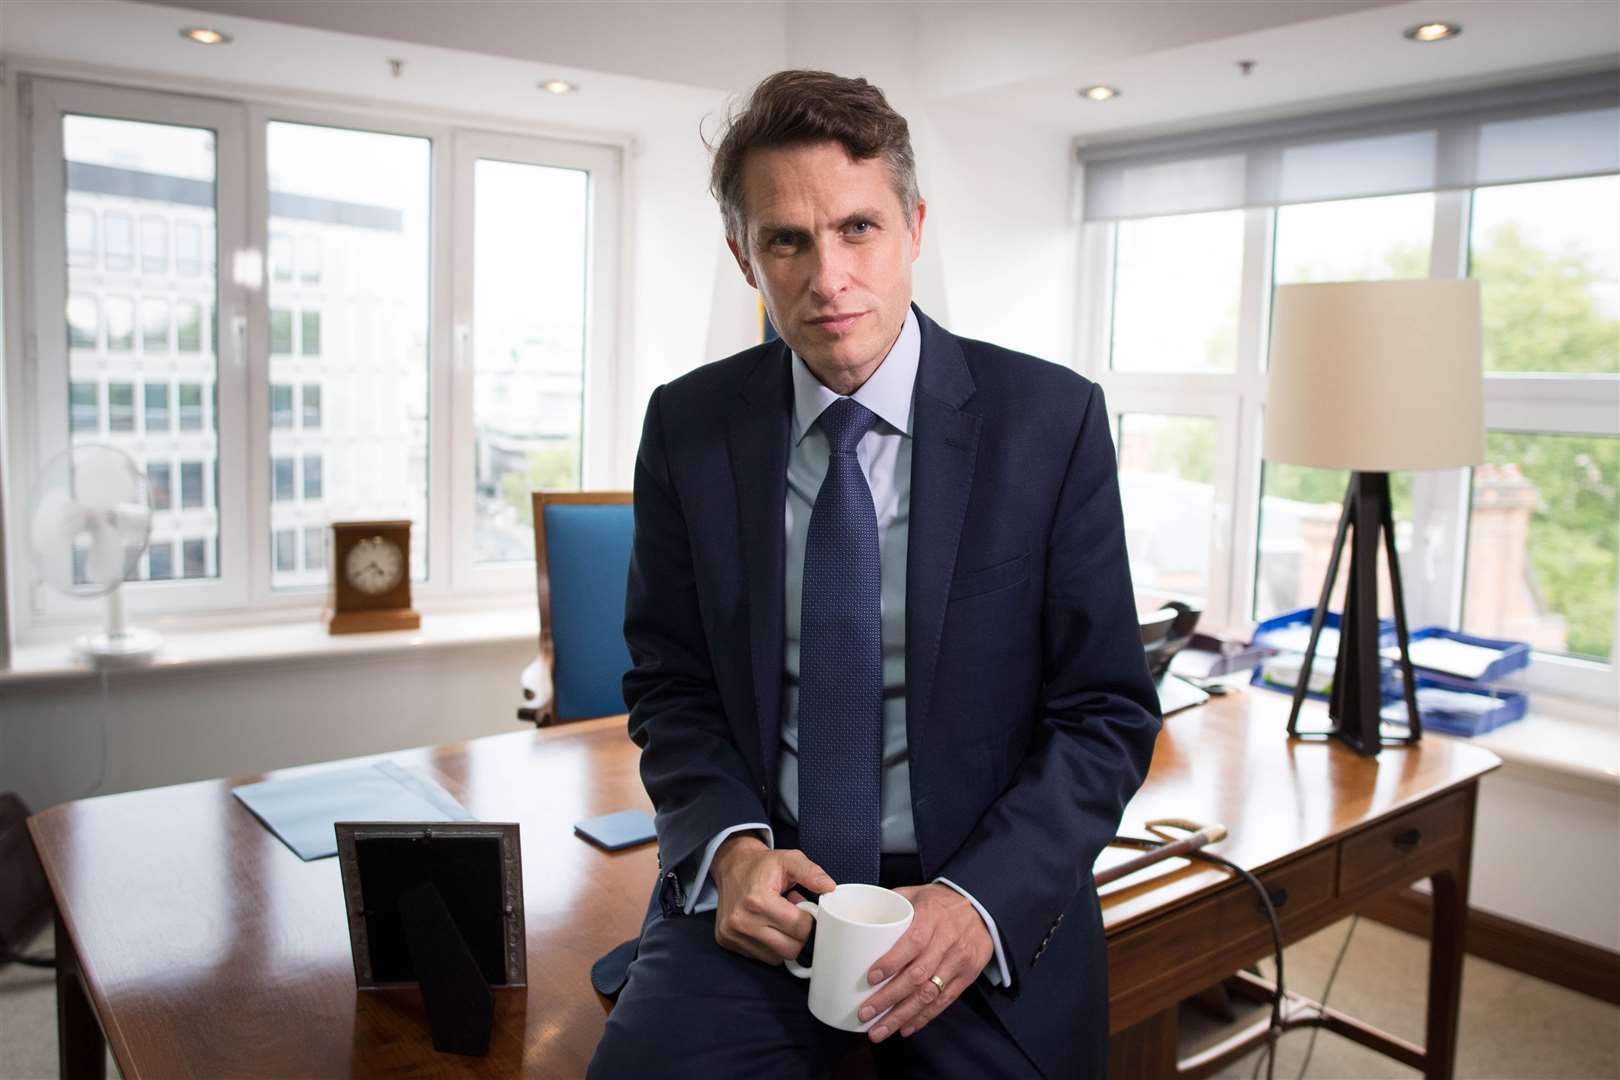 Gavin Williamson has said a committee of experts will look into how different pupils have been disadvantaged across the country (Stefan Rousseau/PA)